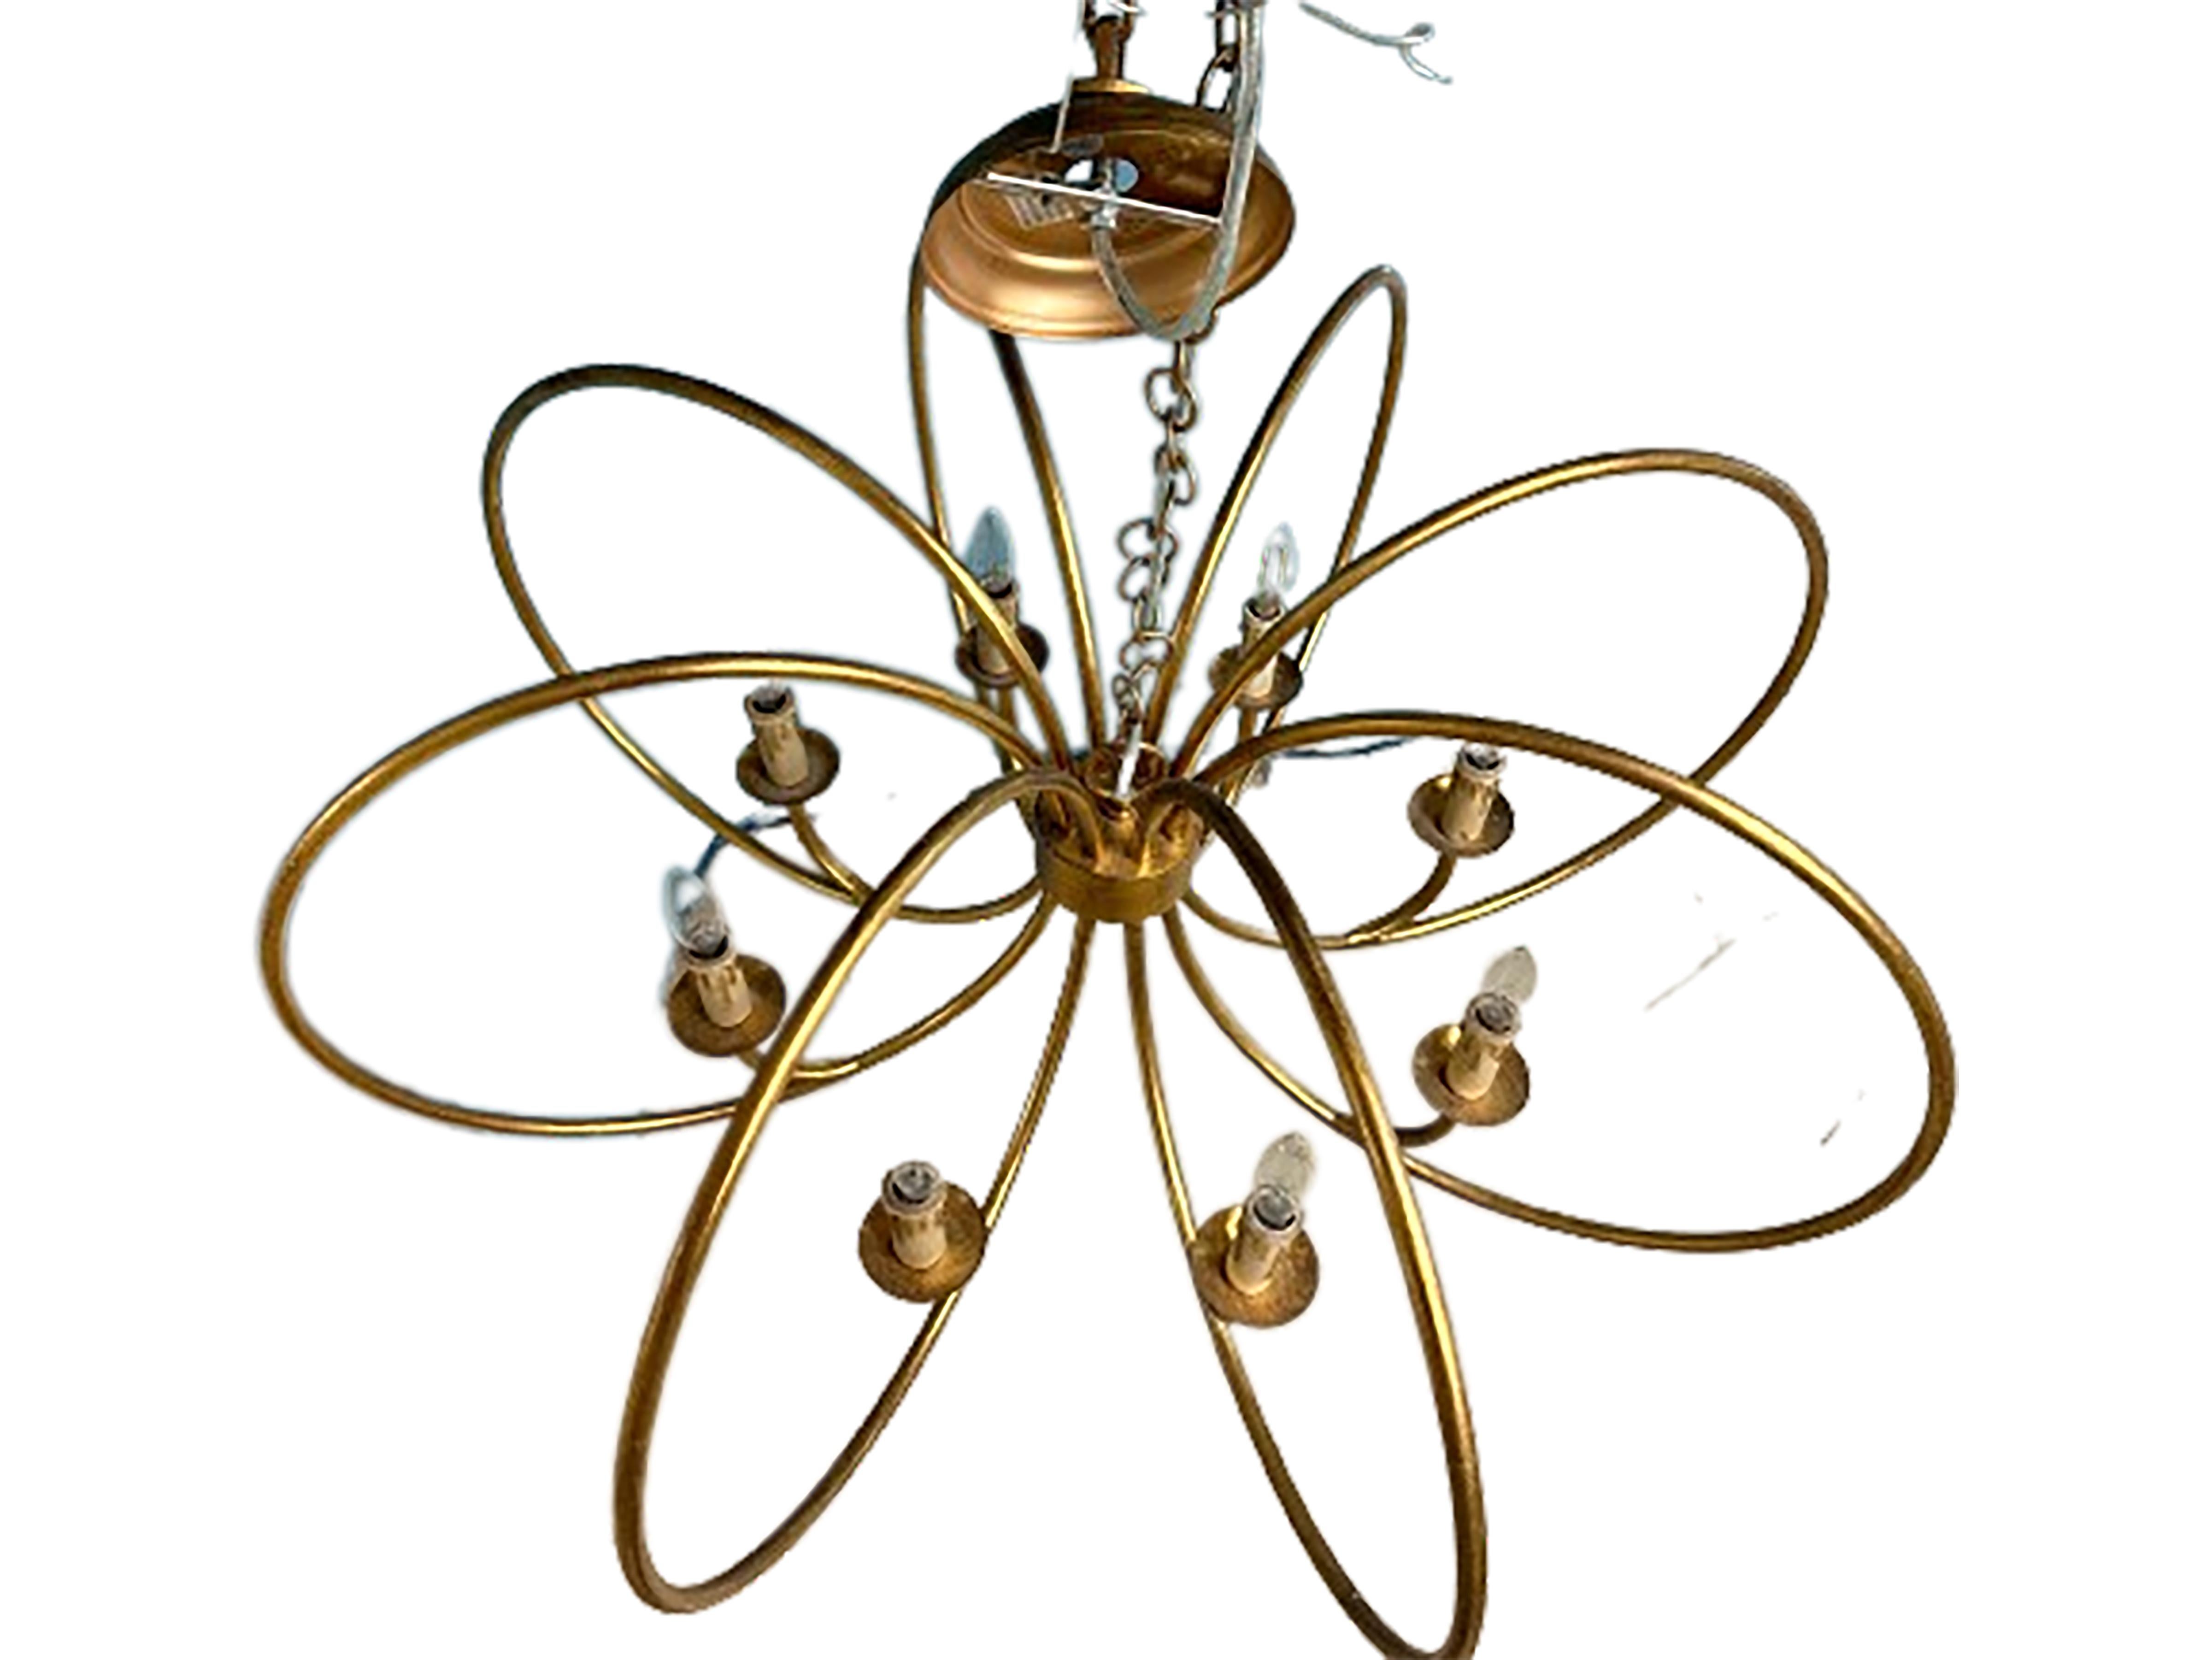 A handsome contemporary handmade golden ring pattern chandelier. Made of painted gold metal. Created during the 21st century. Hand gilt. Wired for electric lighting. 

In very good condition.  

No obvious markings on the piece. 

Would make a great